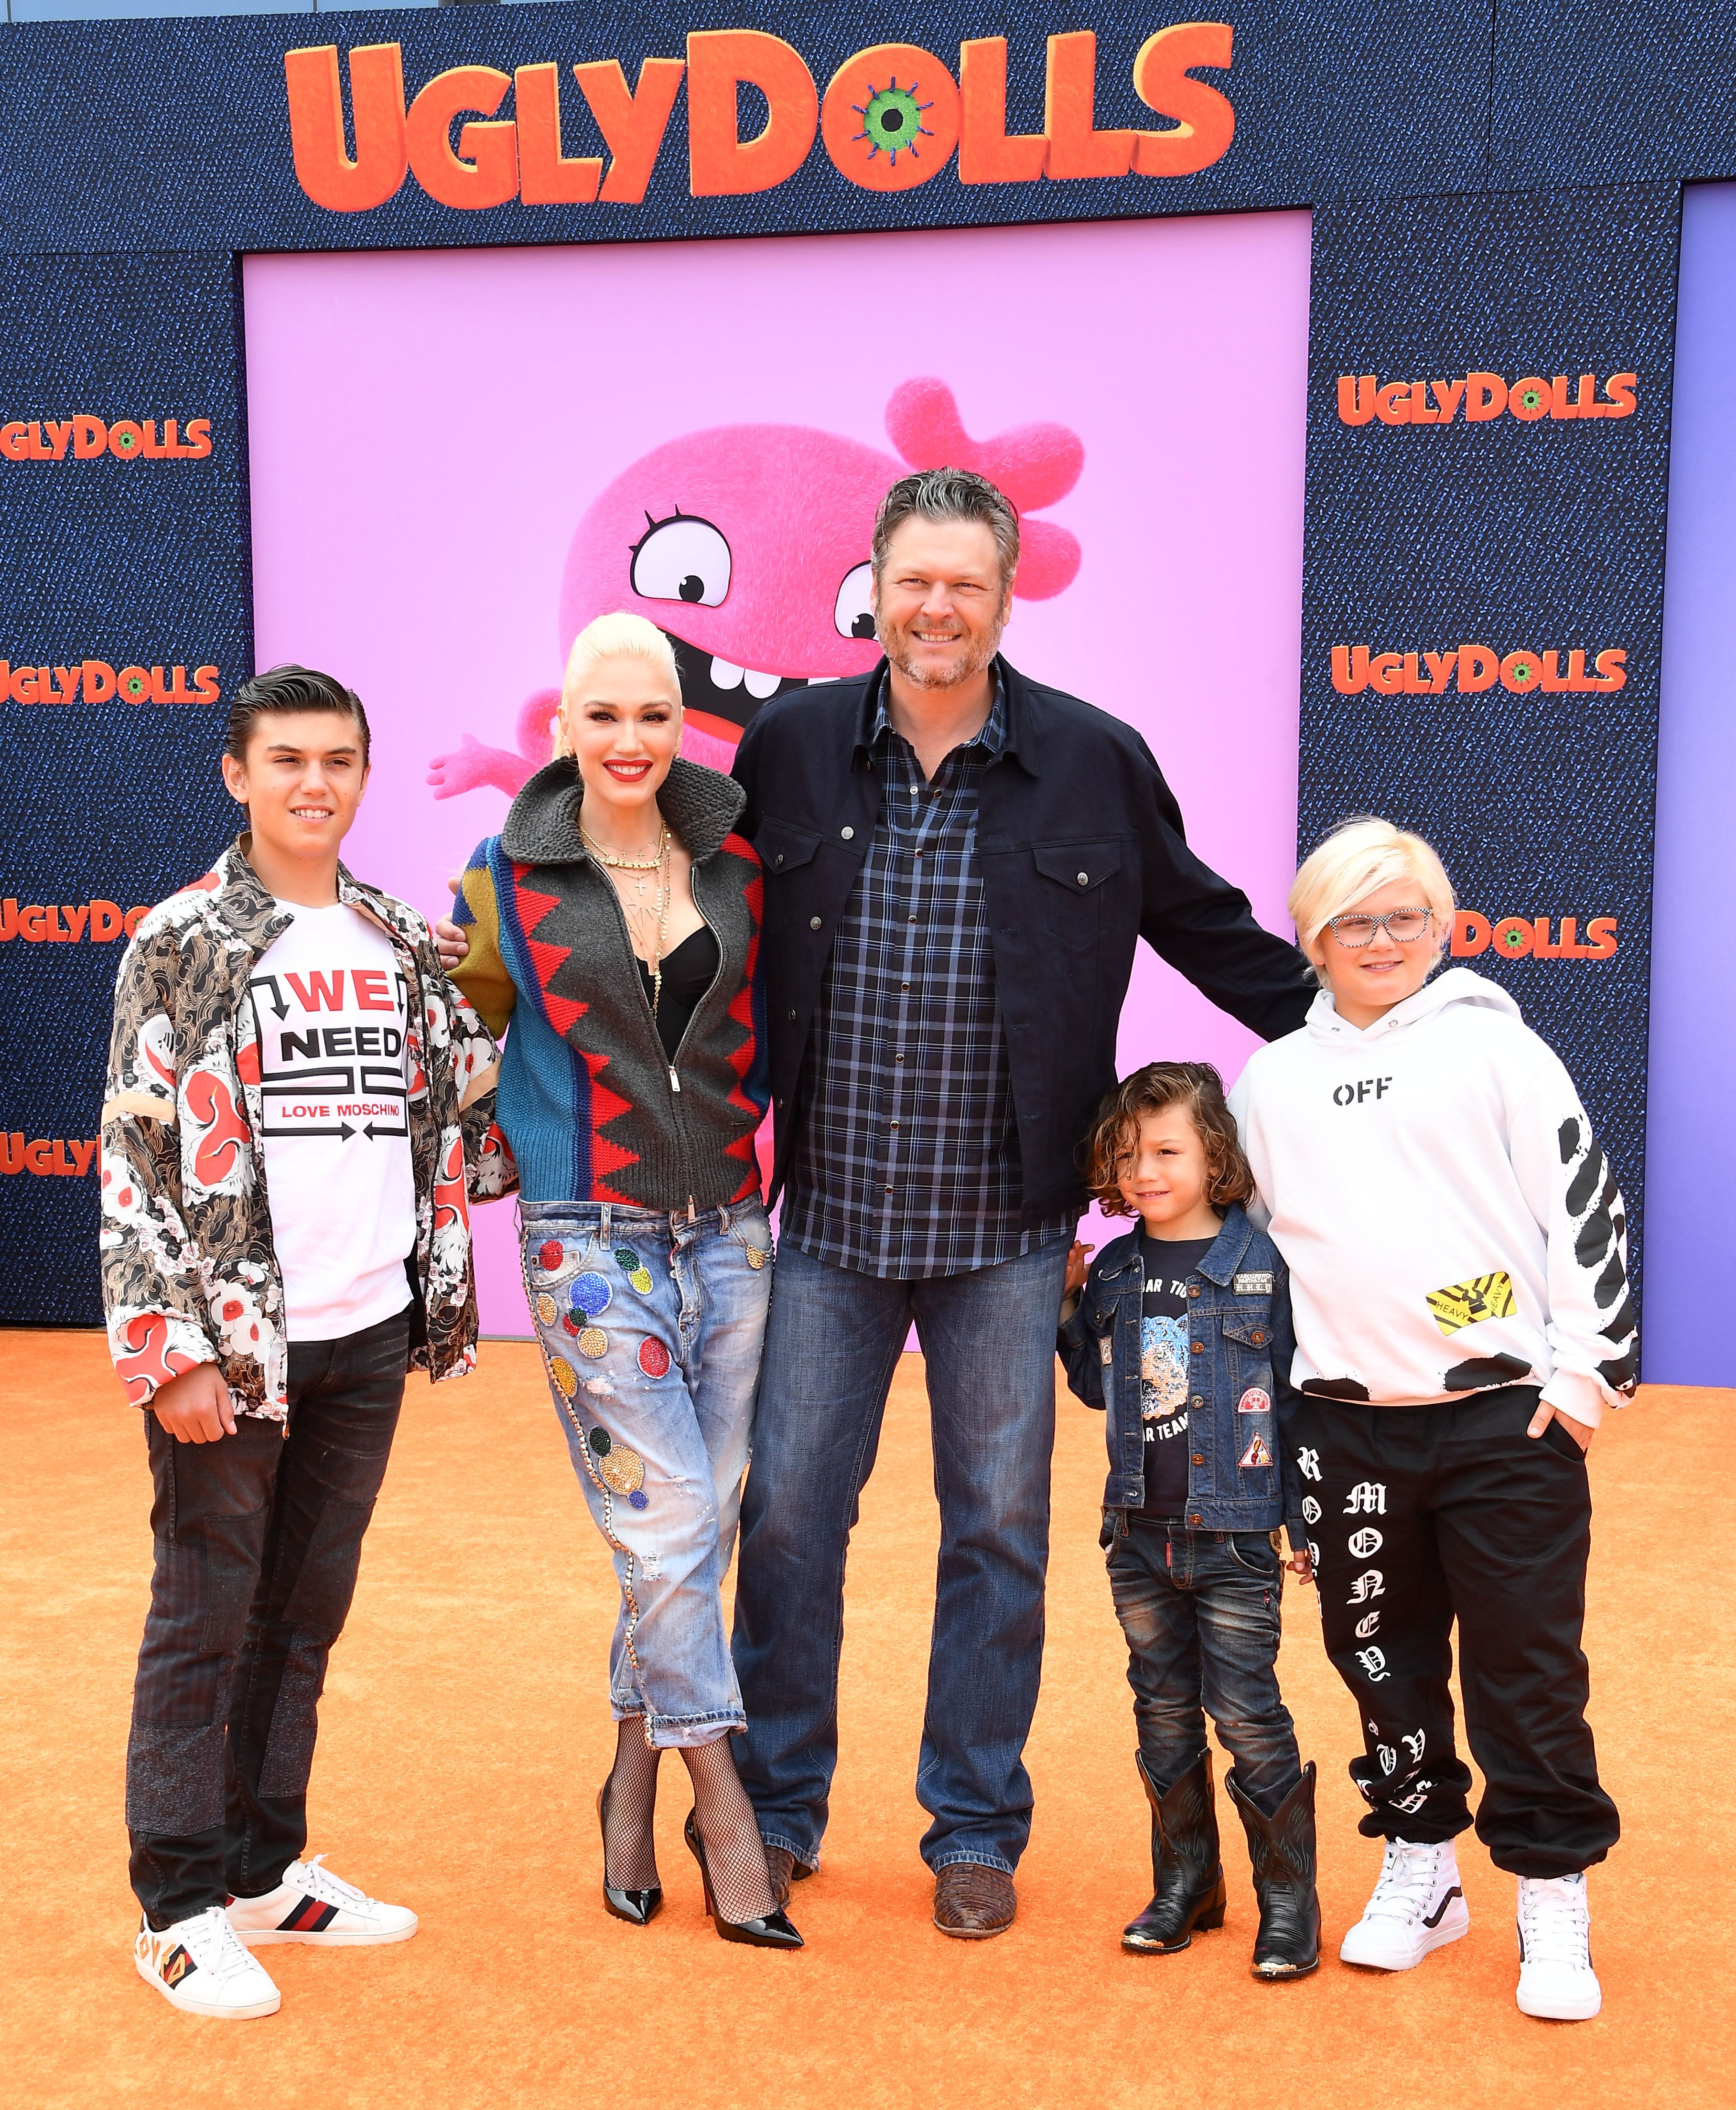 Blake Shelton, Gwen Stefani, and her children, Kingston Rossdale, Apollo Bowie Flynn Rossdale, and Zuma Nesta Rock Rossdale at the STX Films world premiere of "UglyDolls" at Regal Cinemas L.A. Live on April 27, 2019 in Los Angeles, California. | Source: Getty Images